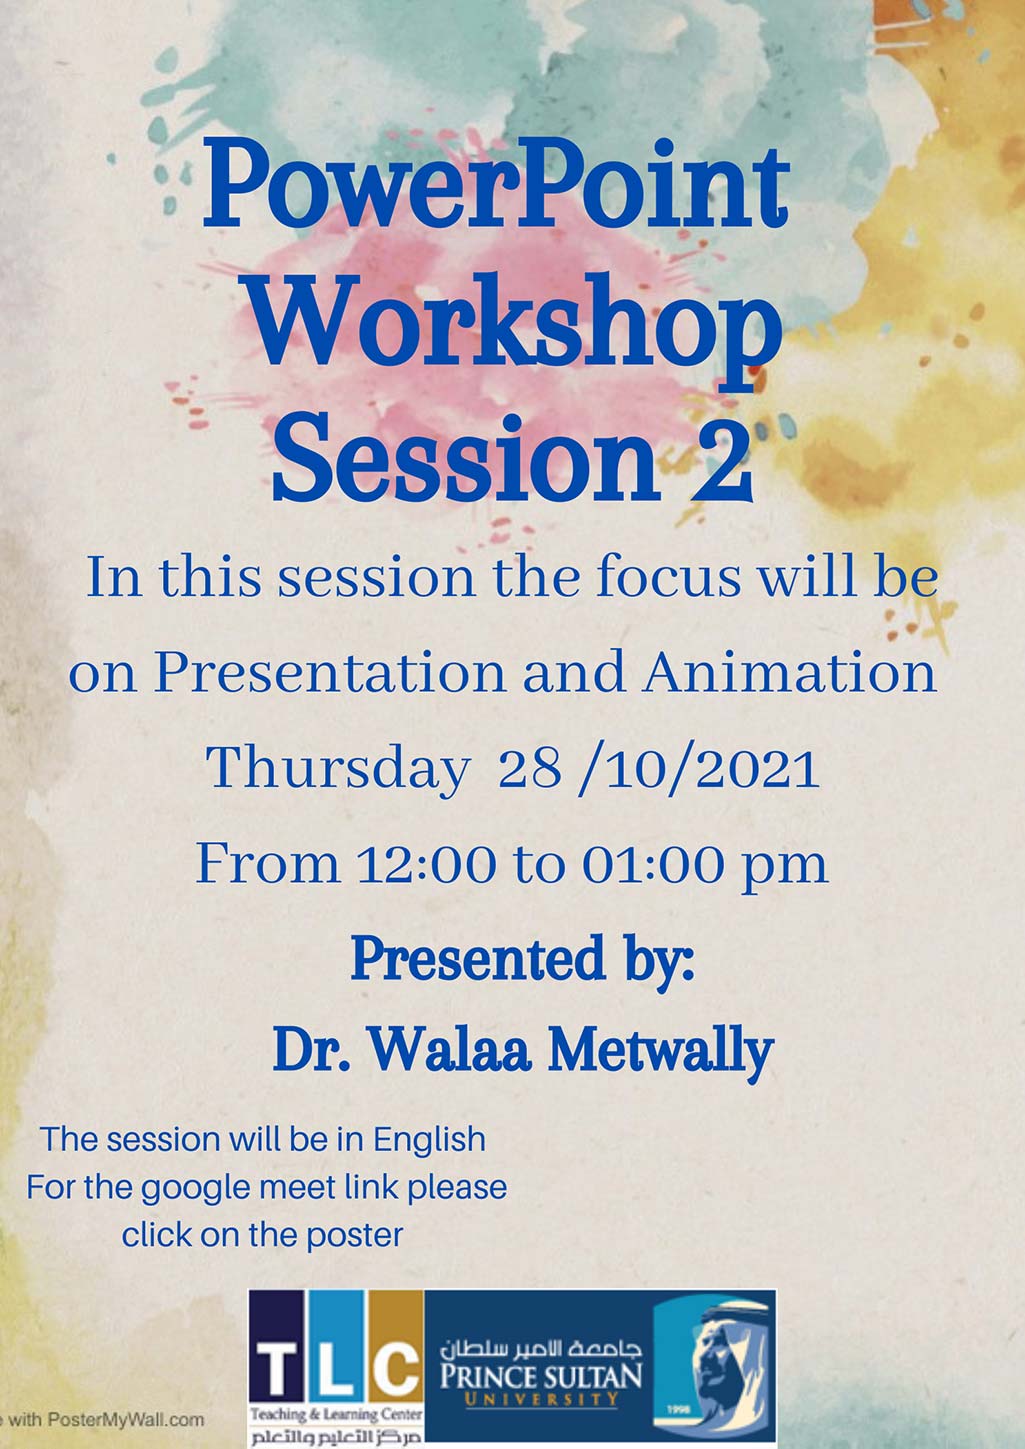 PowerPoint Workshop Session 2